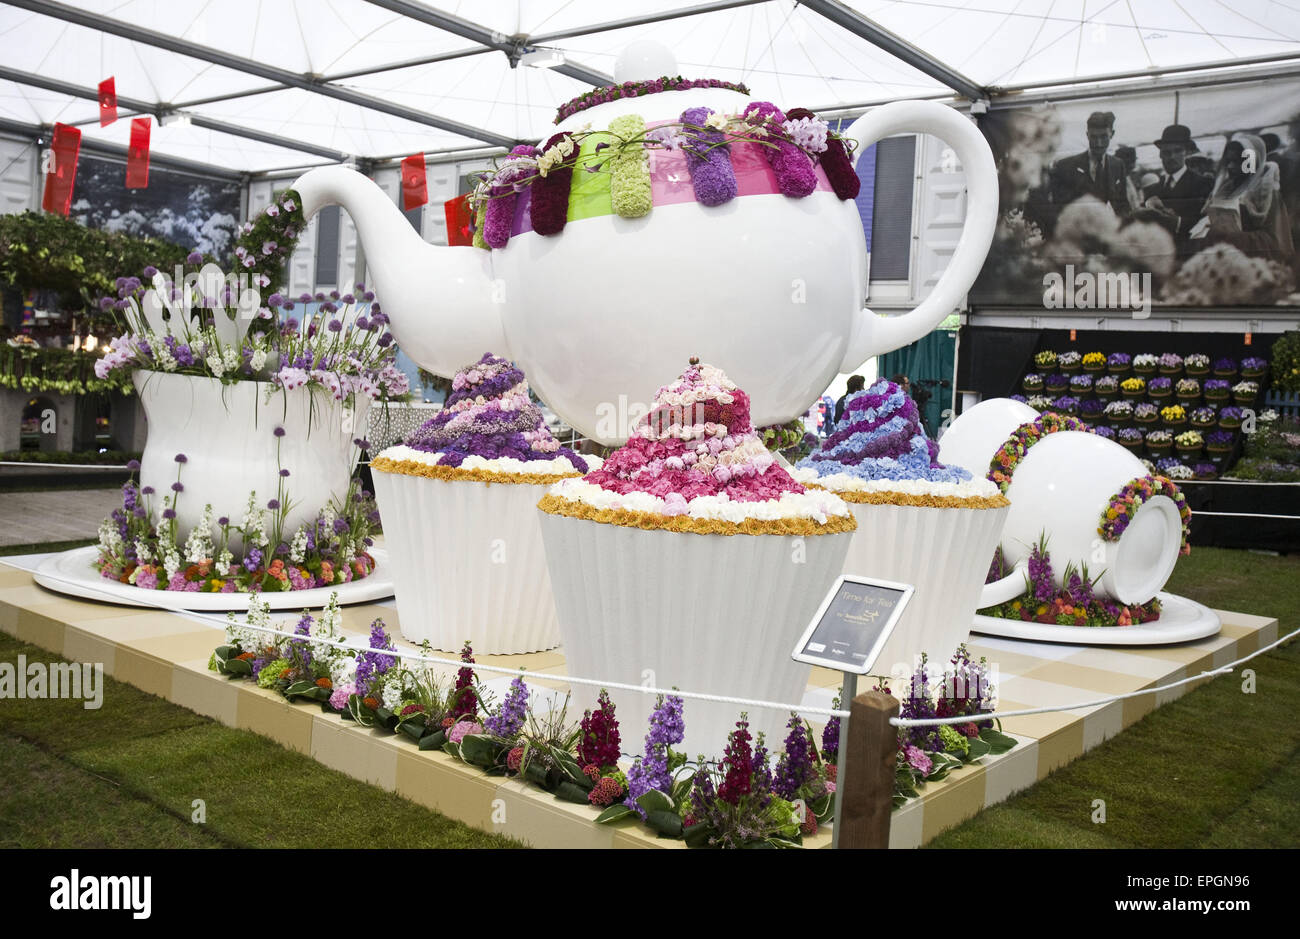 London, UK. 18th May, 2015. Interflora display features larger then life tea pot and a tea cup complete with muffins and buiscits. The Chelsea Flower Show organised by Royal Horticultural Society (RHS) in the grounds of the Royal Hospital Chelsea every May, is the most famous flower show in the United Kingdom, perhaps in the world. It attracts exhibitors and visitors from around the world, London, UK. Credit:  Veronika Lukasova/ZUMA Wire/Alamy Live News Stock Photo